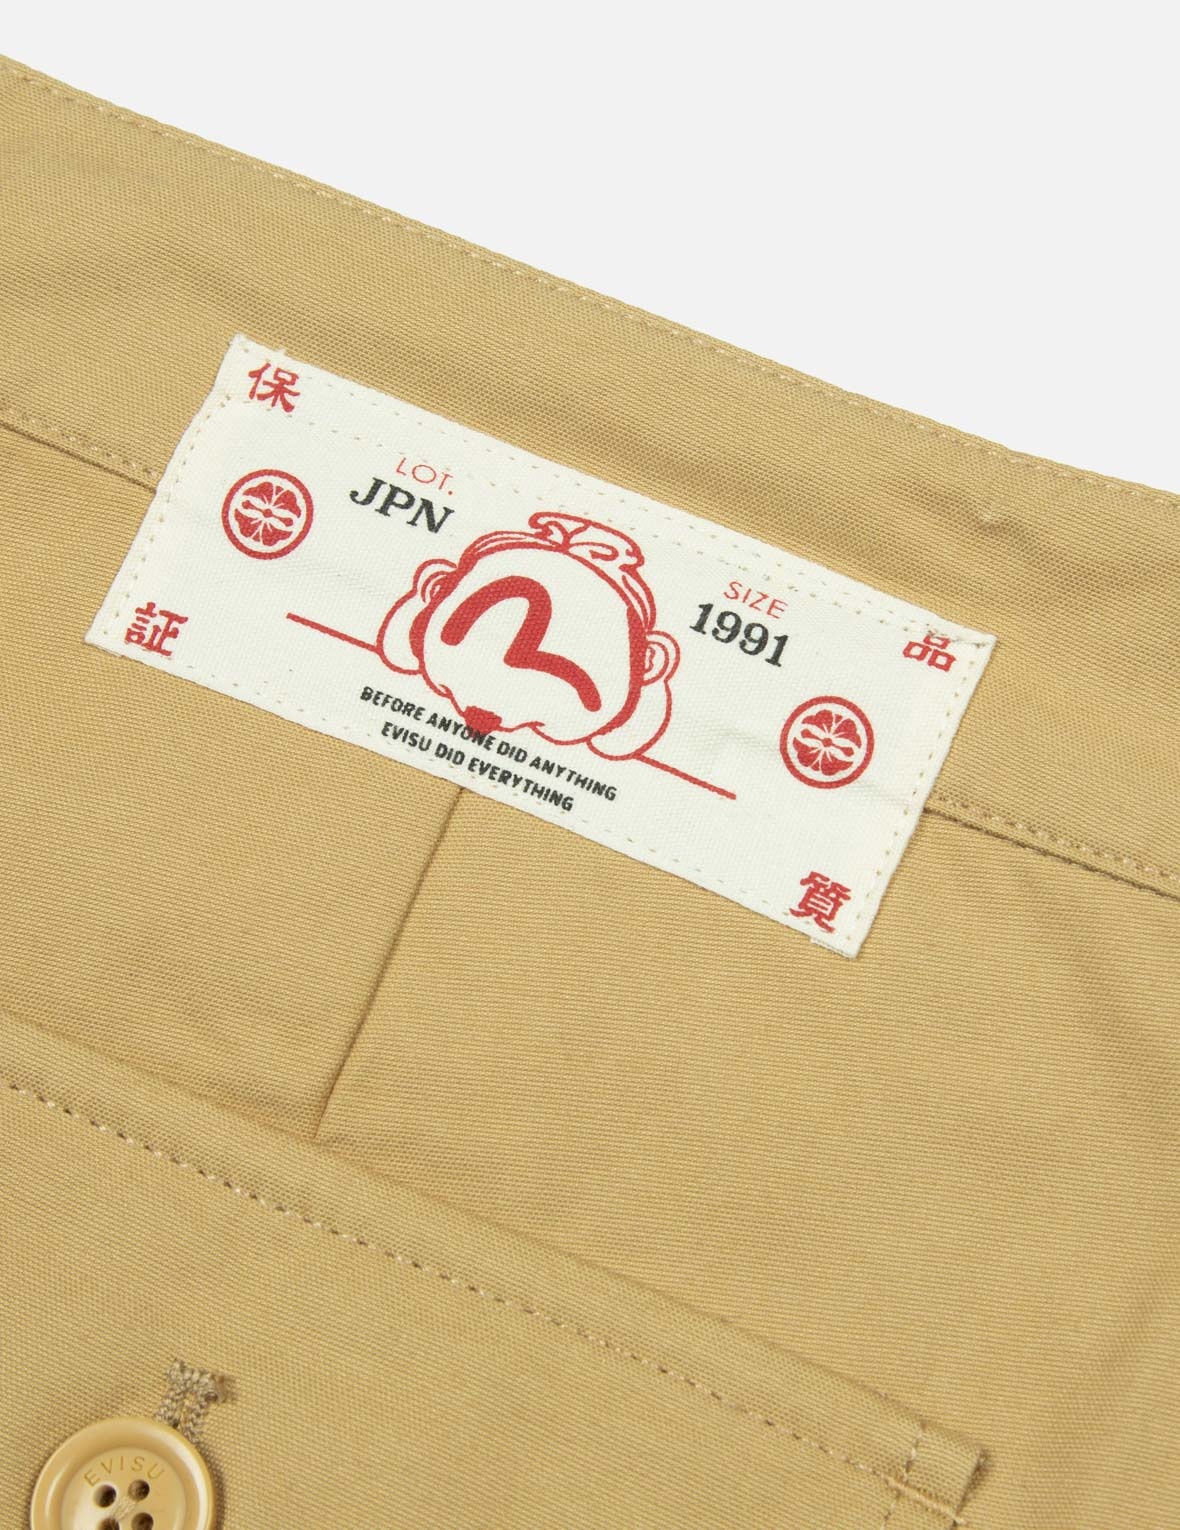 SEAGULL EMBROIDERY AND FLAG WOVEN LABELS RELAX FIT CHINO PANTS - 12